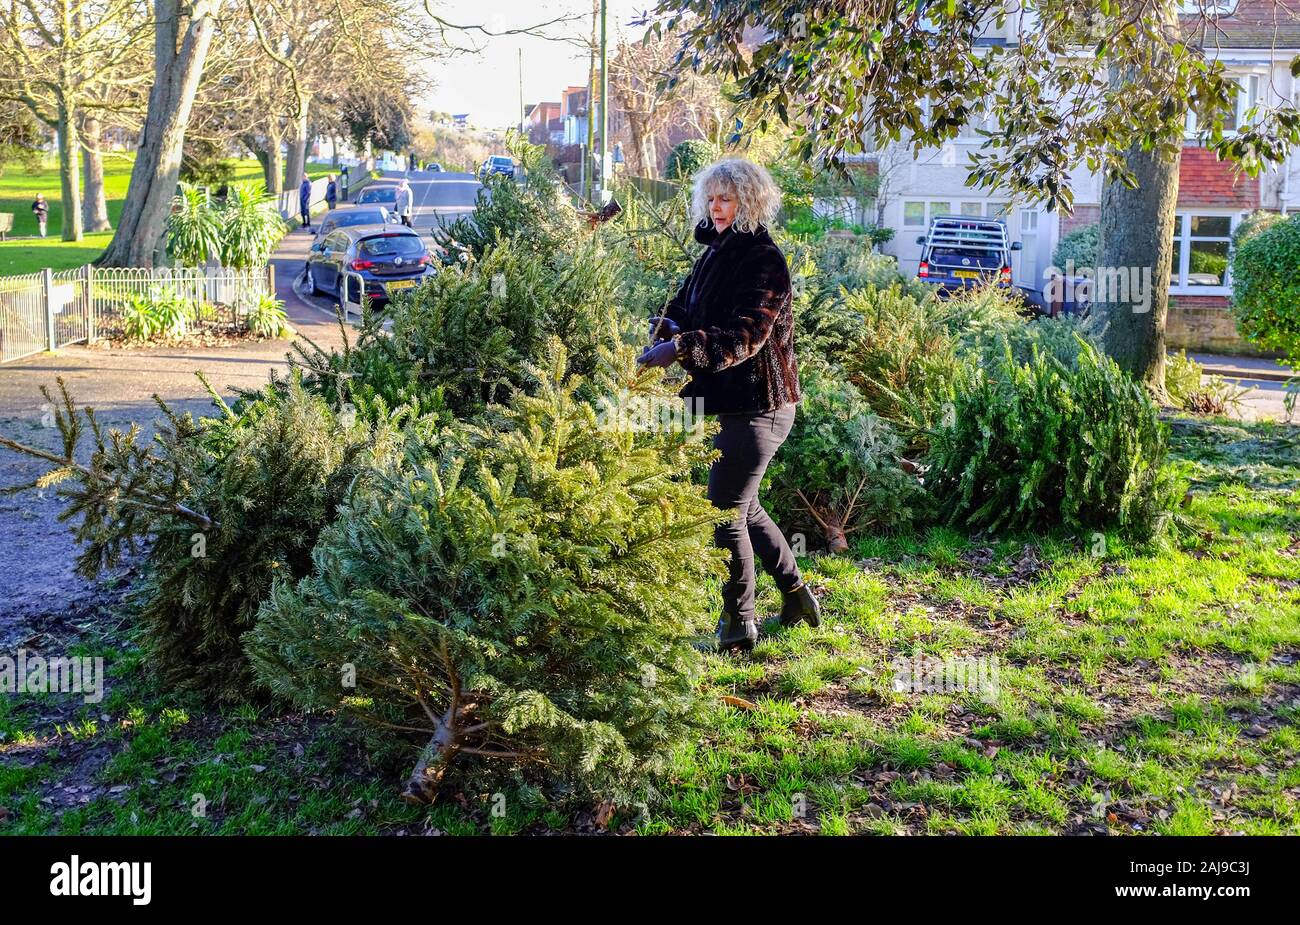 Brighton UK 3rd January 2020 - A woman drops off her Christmas tree at a recycling point in Queens Park Brighton as the festive holiday draws to a close. Every tree collected in Brighton is turned into soil improver or compost and prevents more waste going to landfill. Credit: Simon Dack / Alamy Live News Stock Photo